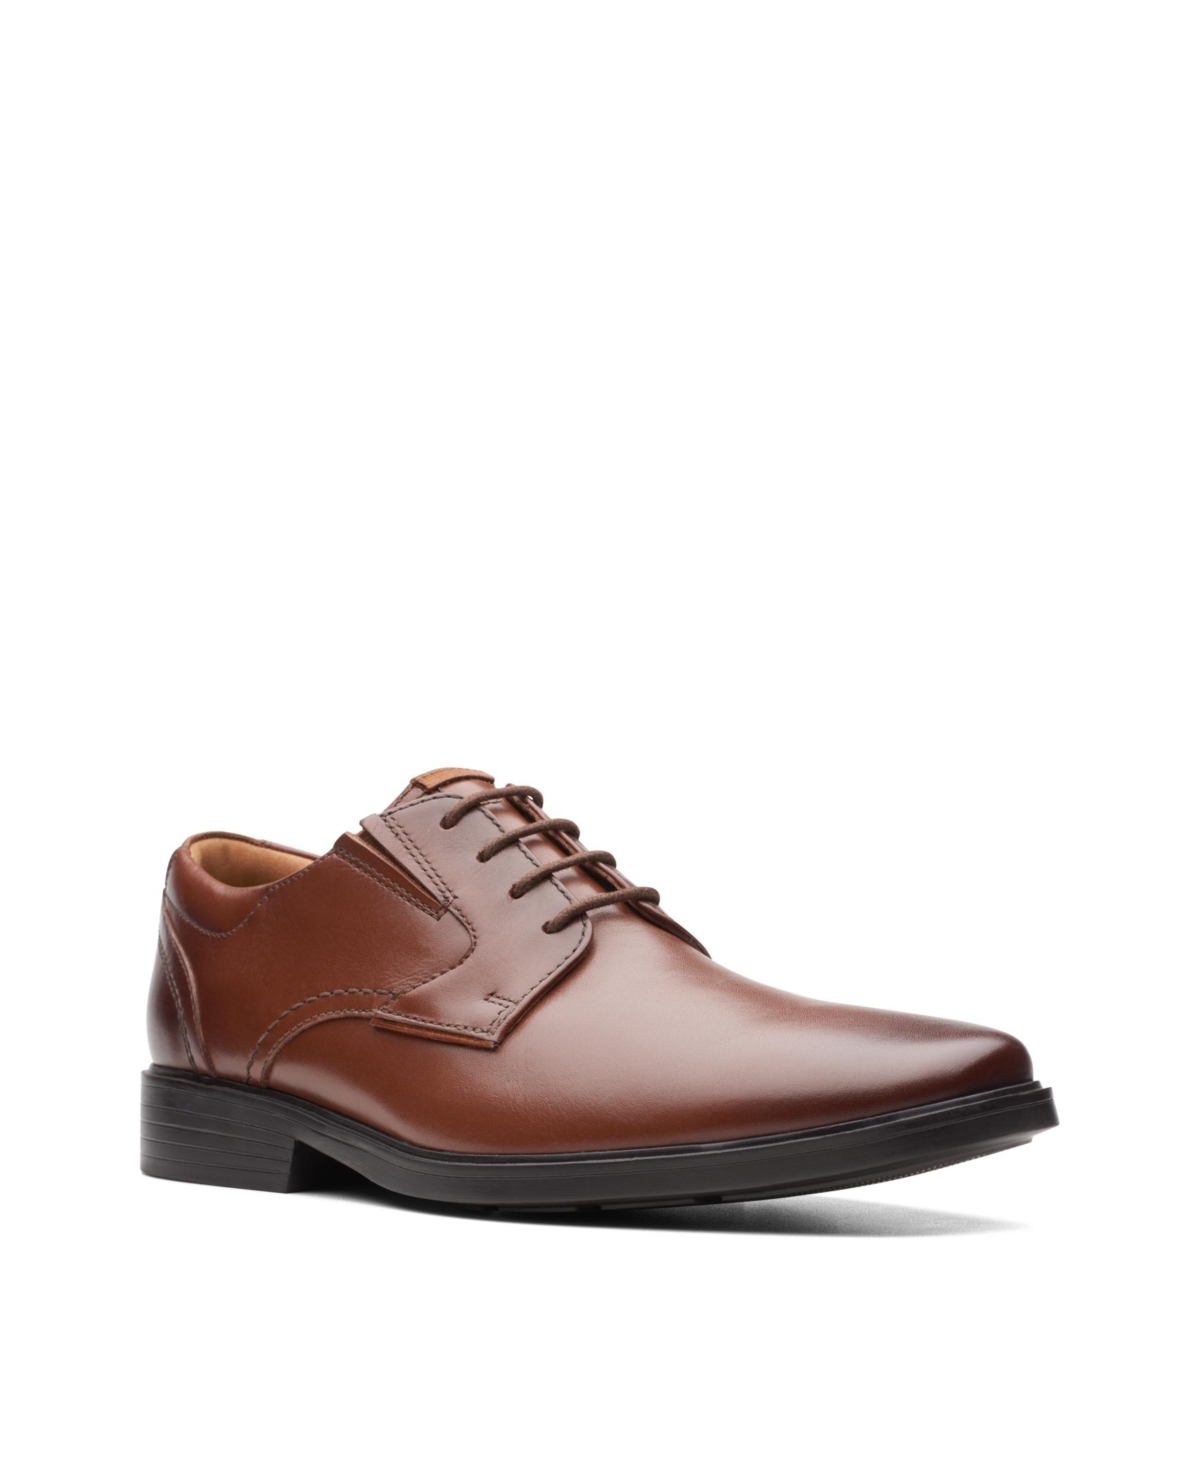 Shop Clarks Men's Collection Lite Low Comfort Shoes In Tan Leather